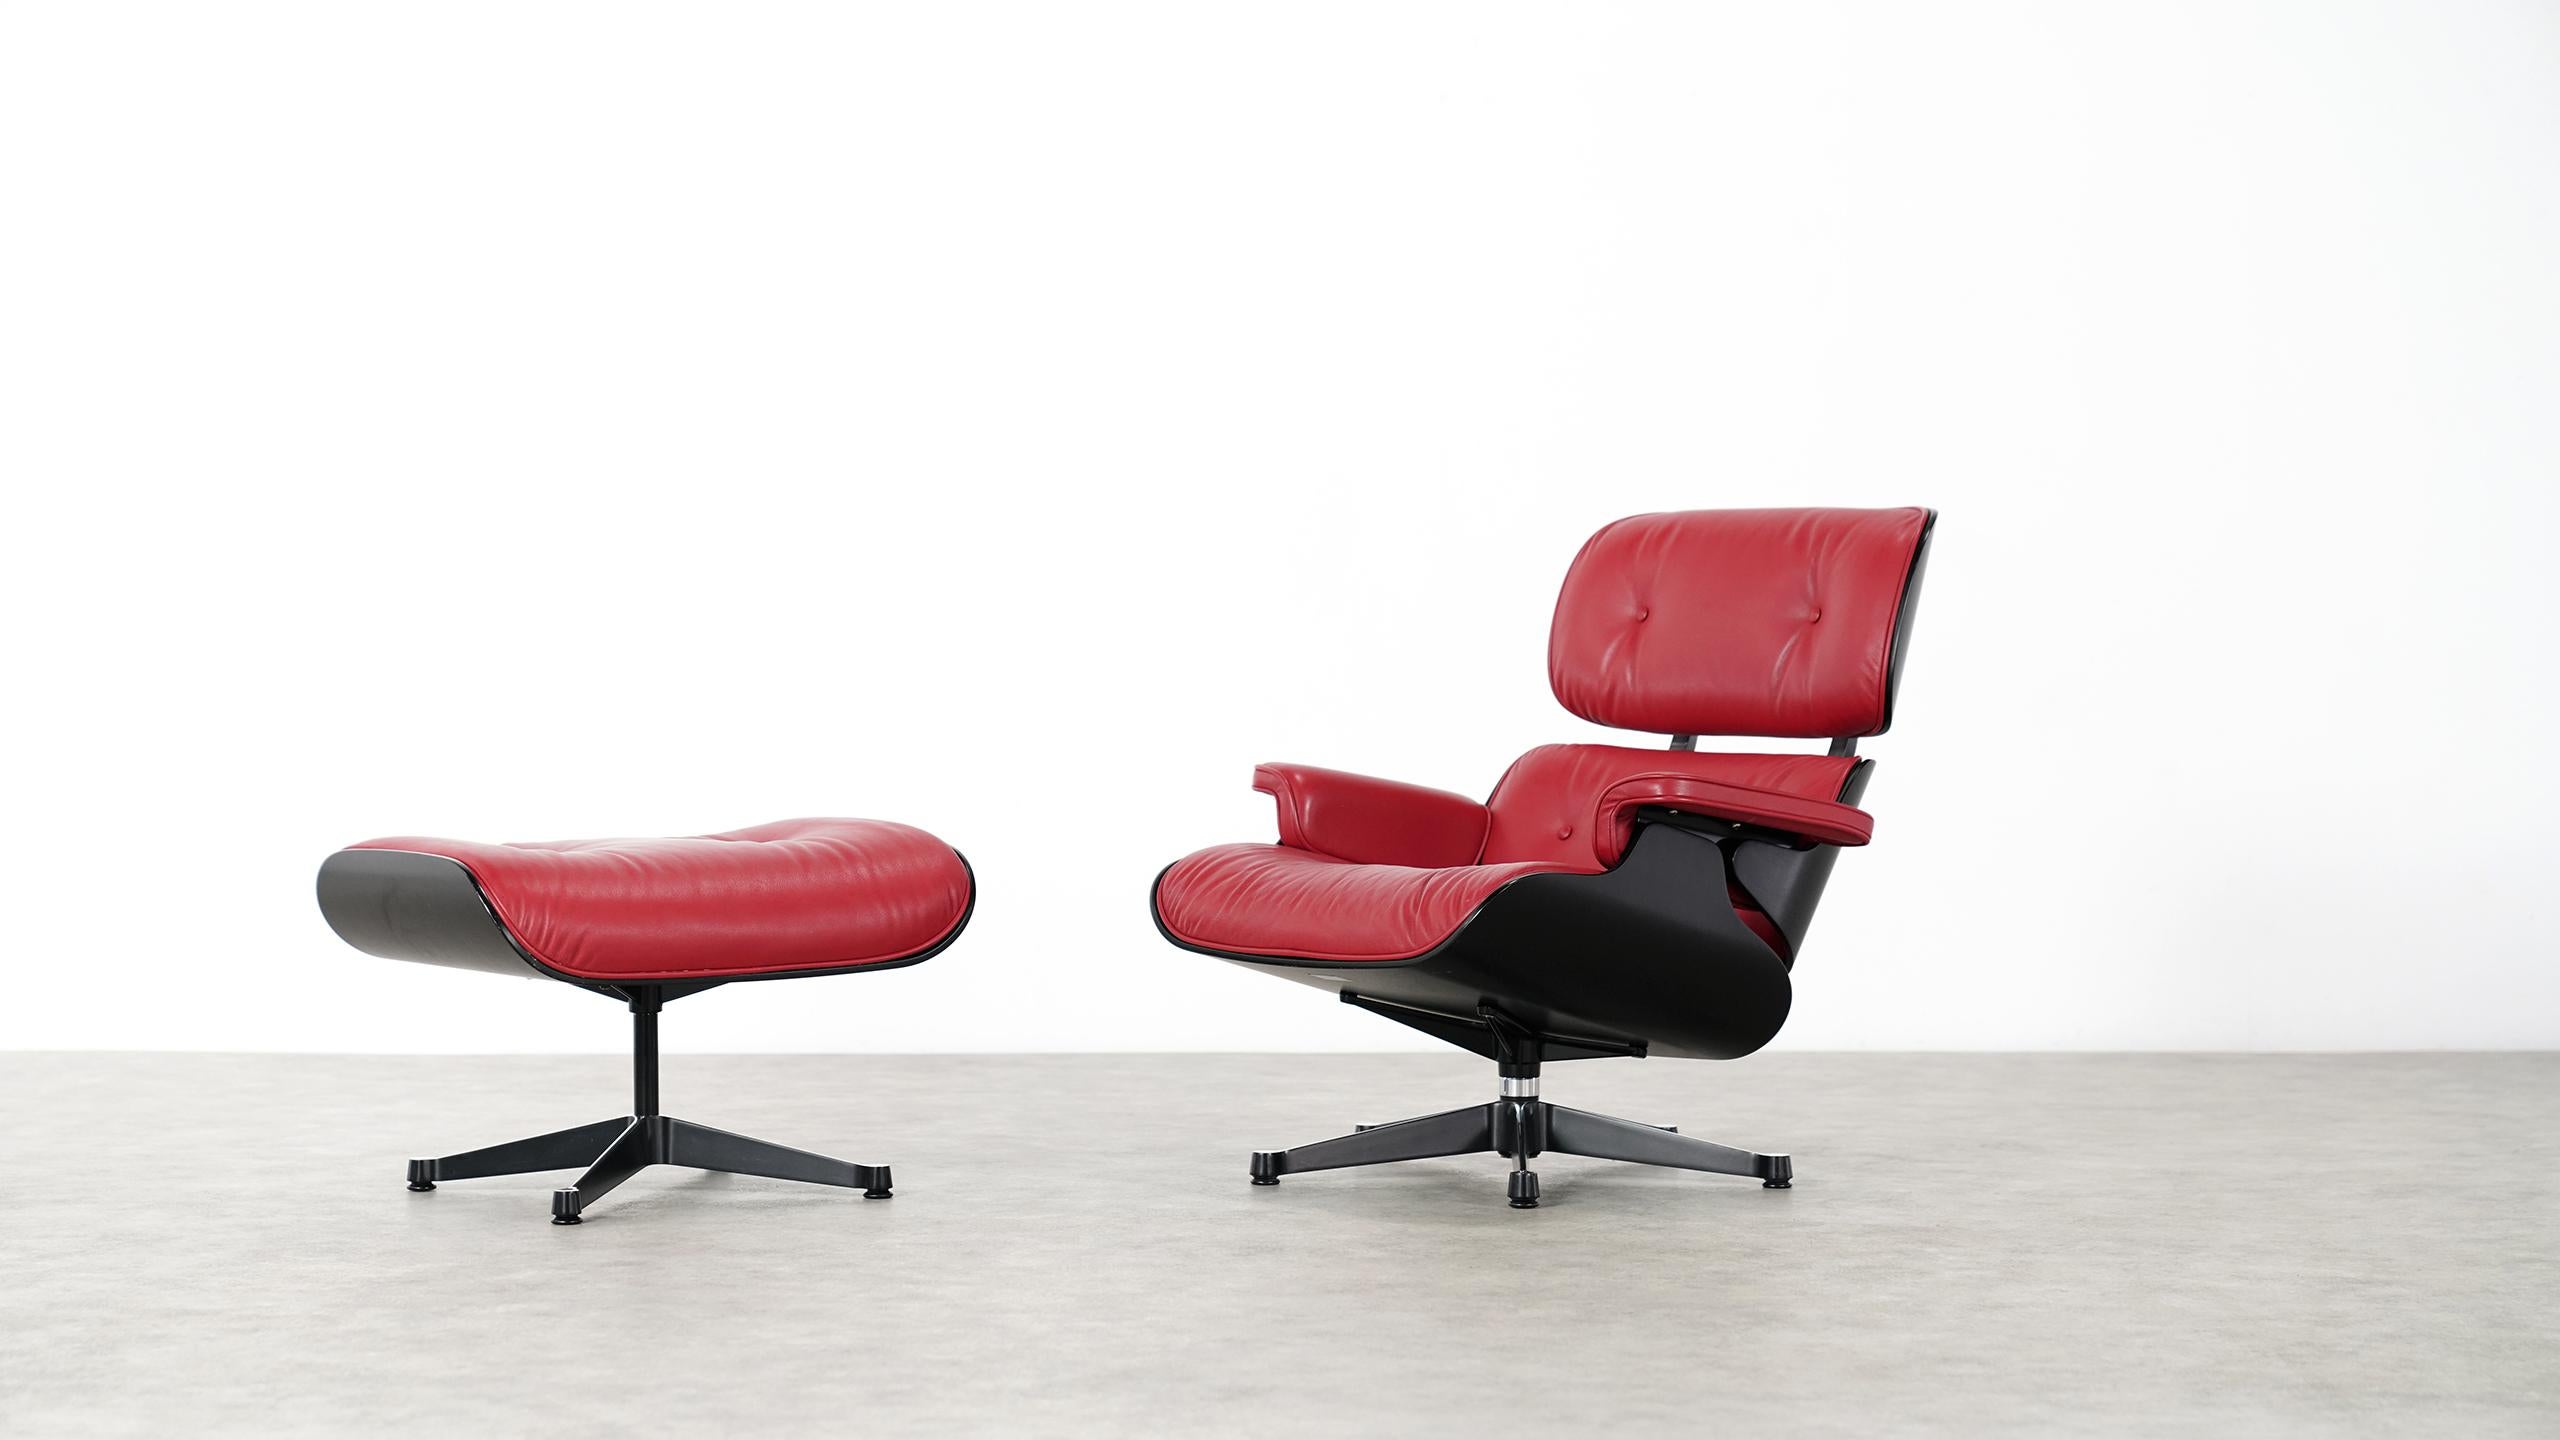 Vitra Charles Eames Lounge Chair and Ottoman by Vitra Red Leather, Black Shells 1